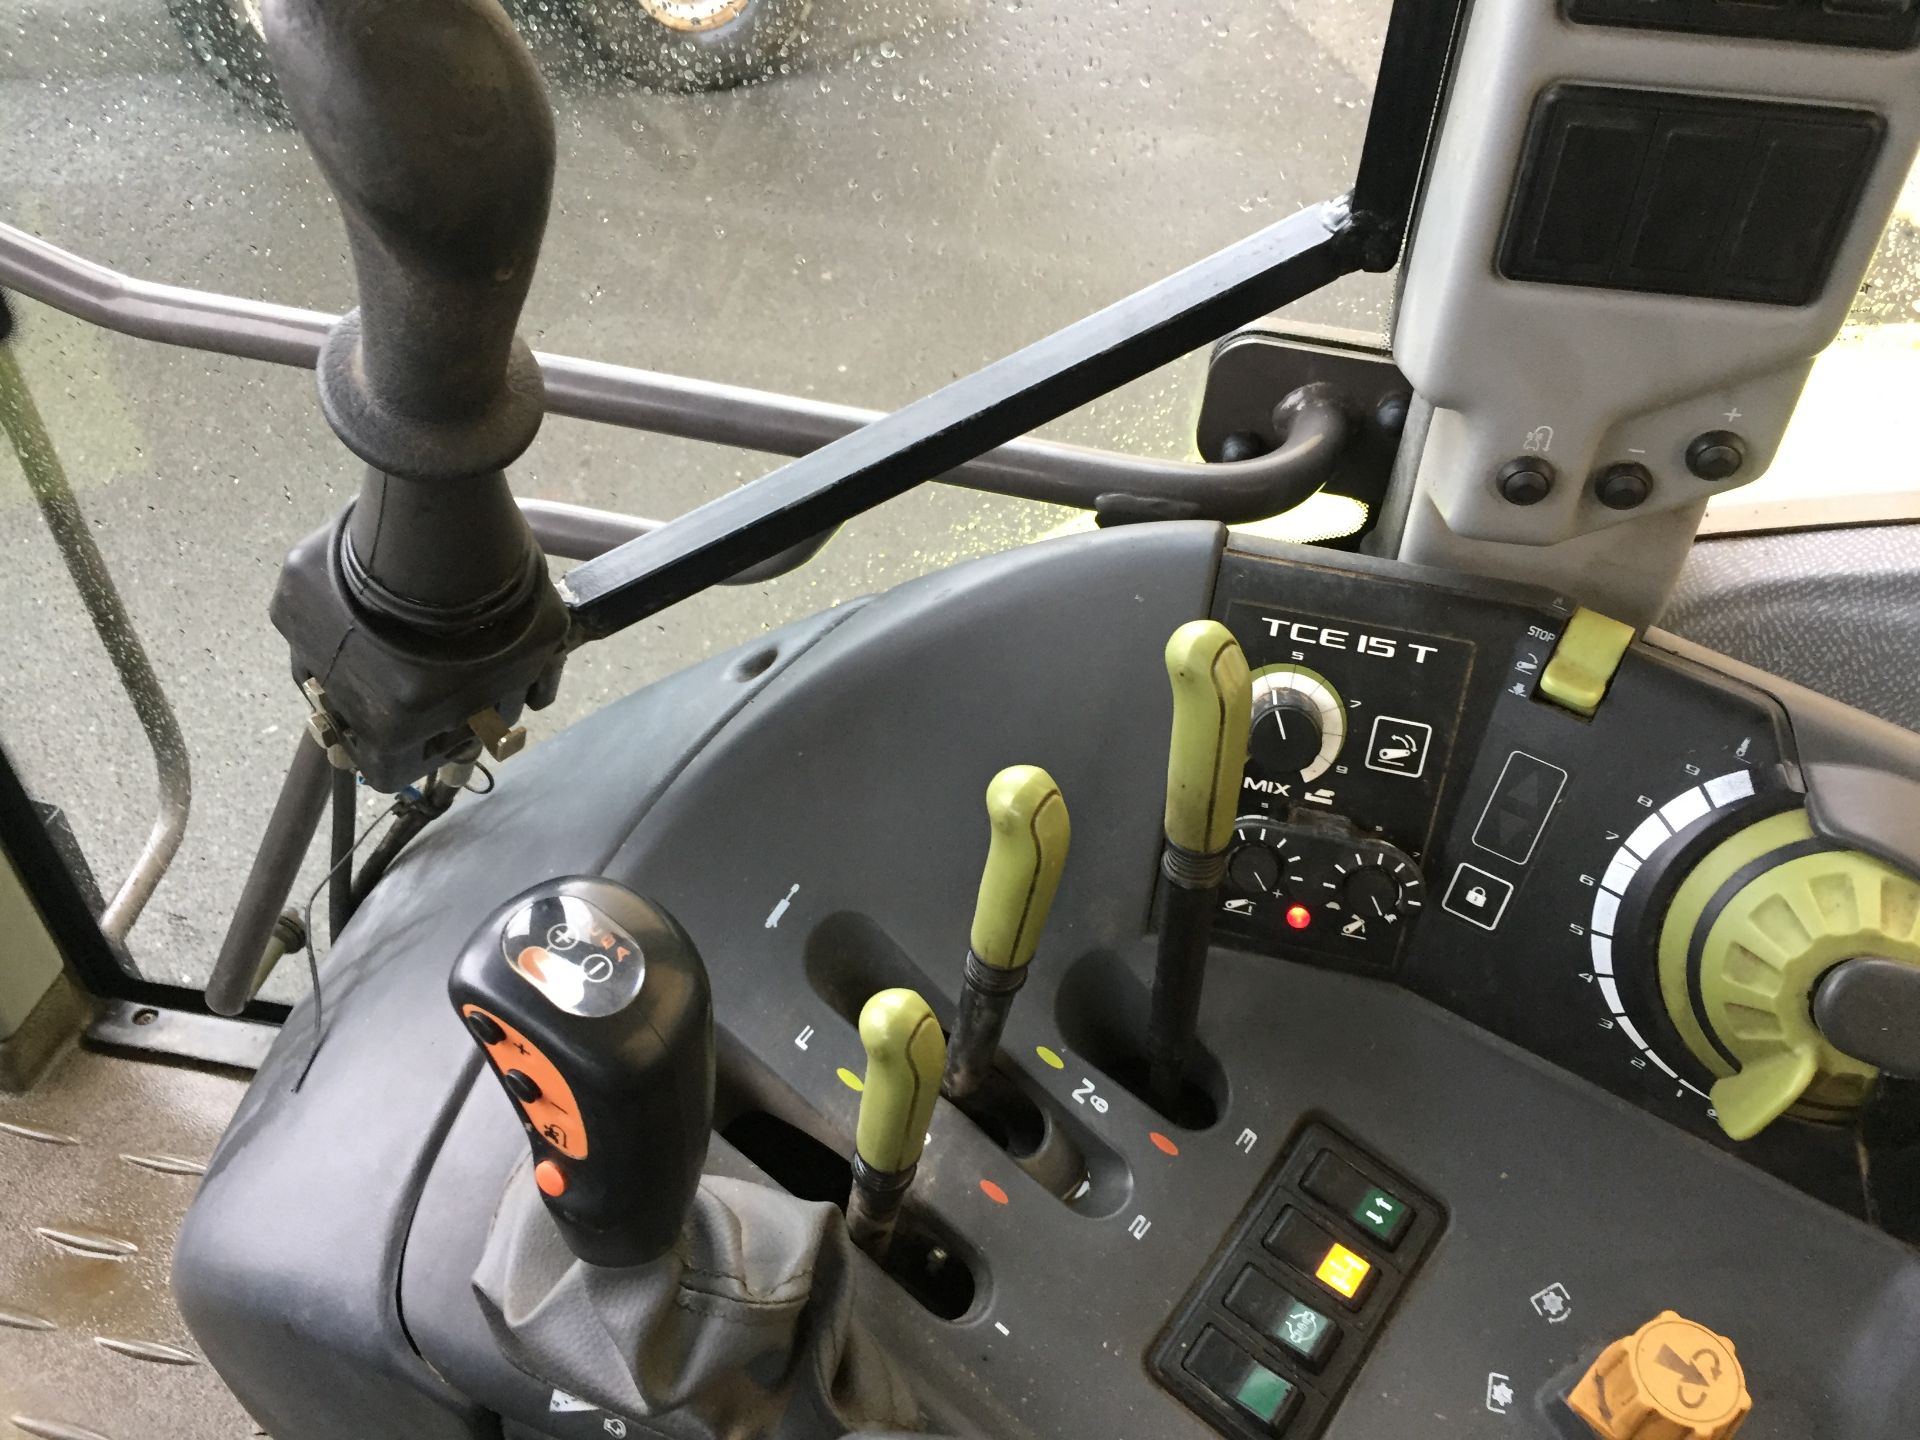 2007 Claas Ares 657 ATZ 4WD Tractor - Image 11 of 11